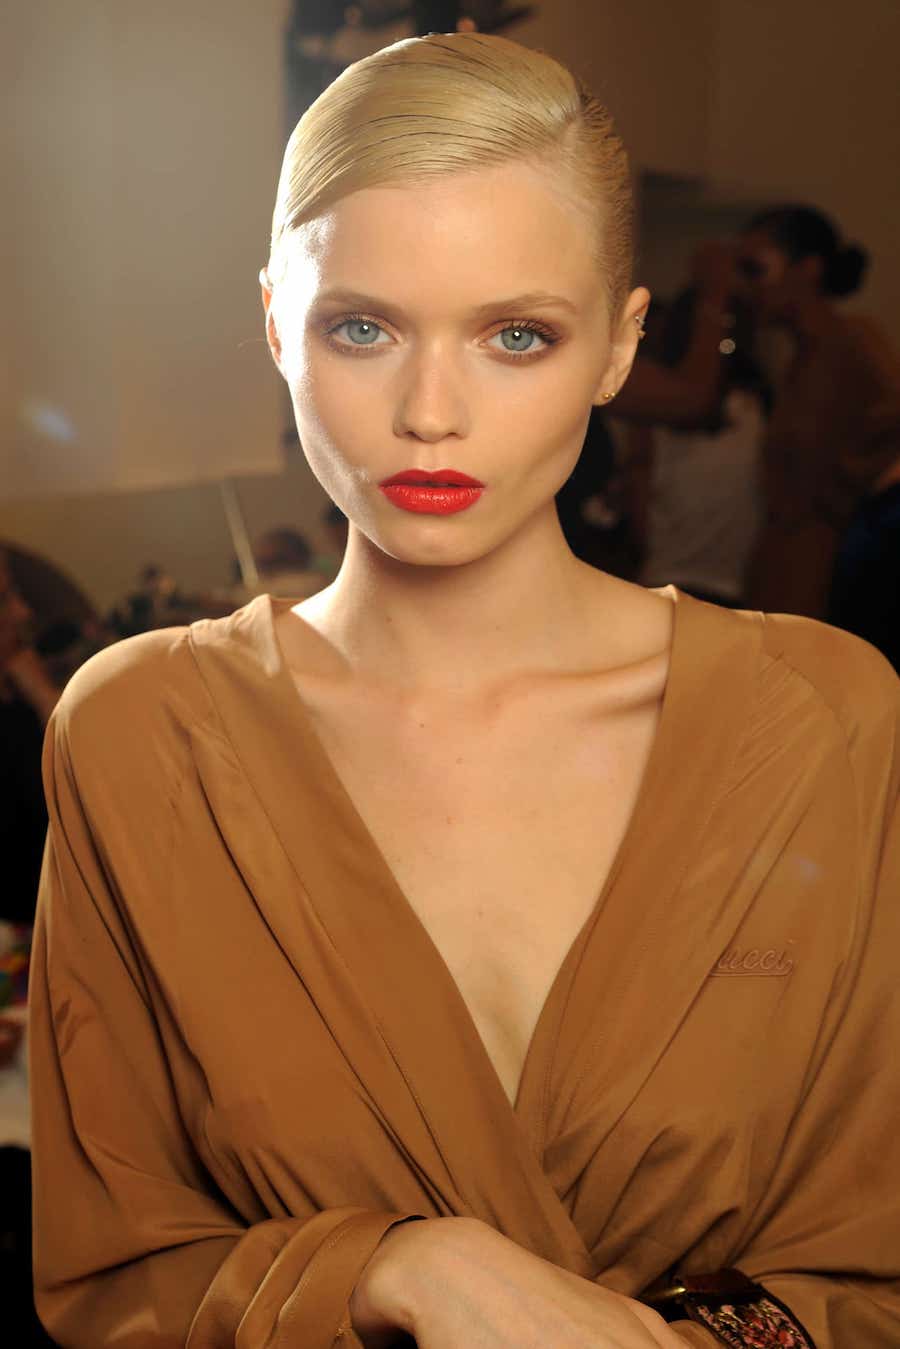 2.Abbey Face (Gucci S:S 11  backstage).jpg